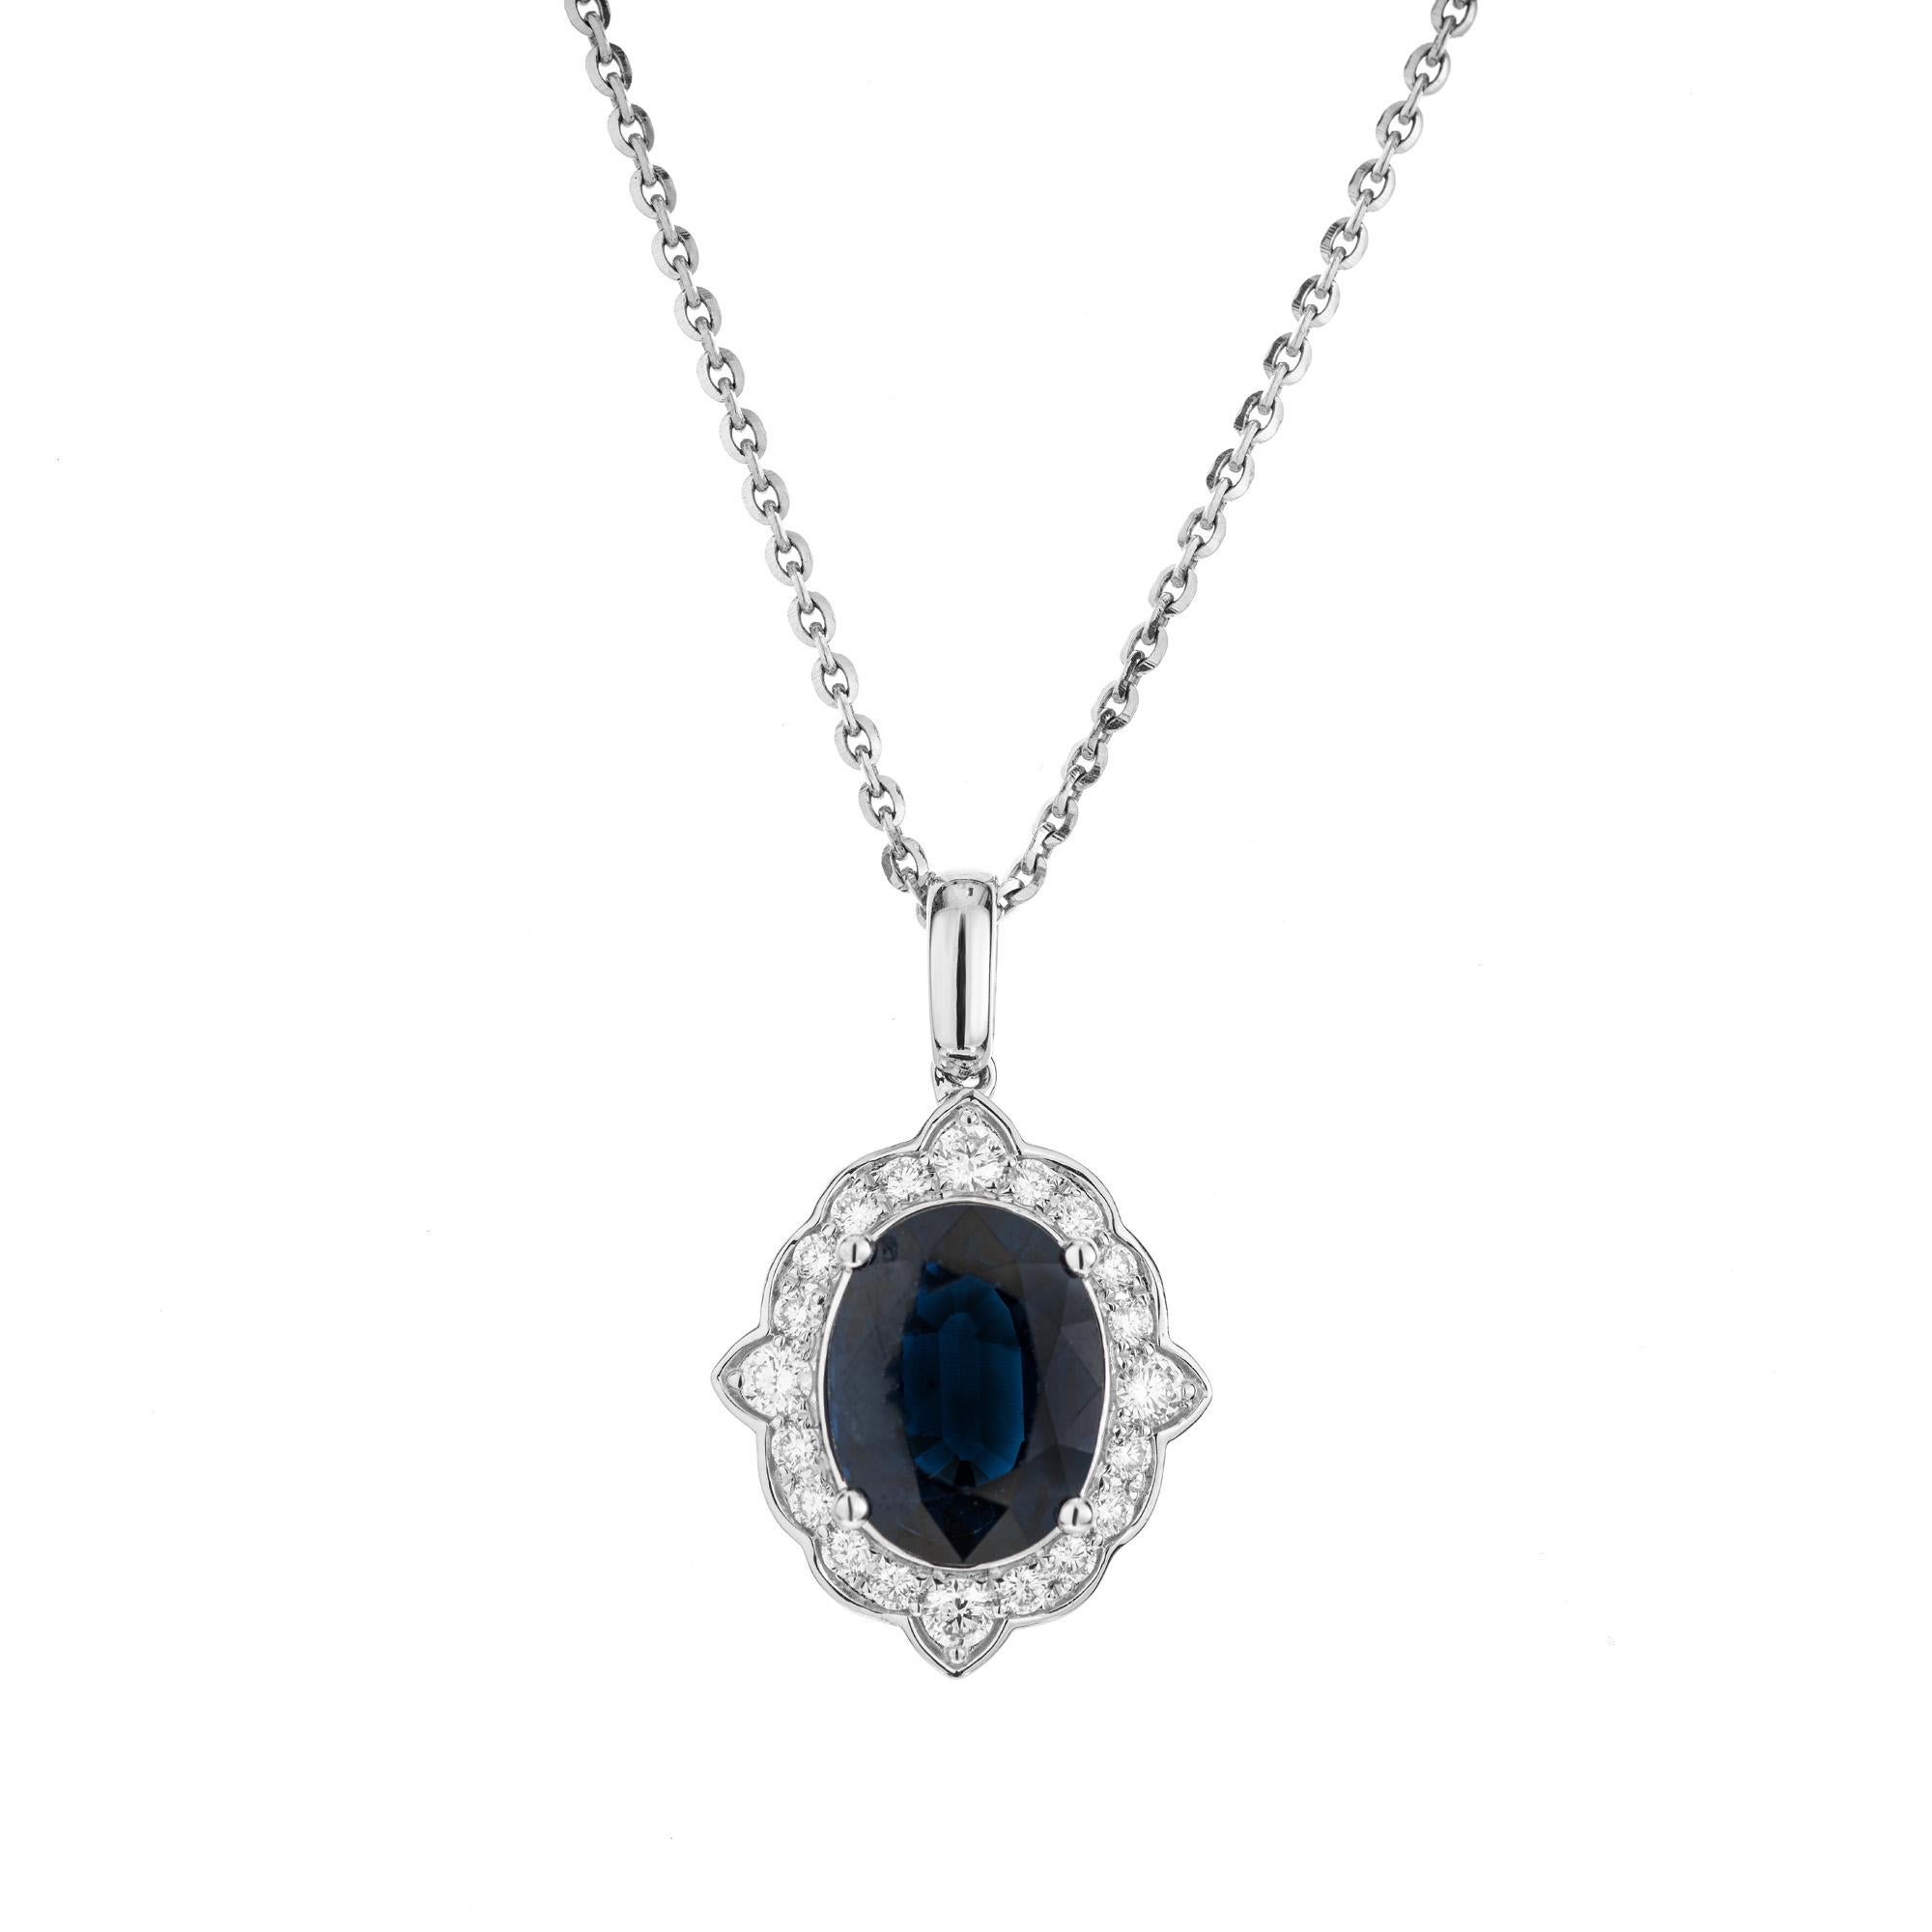 Sapphire Diamond Gold Pendant Necklace. This exquisite piece begins with a stunning 4.16ct oval sapphire center stone. The rich deep blue gemstone is GIA certified simple heat only. It is mounted in a 14k white gold setting with a halo of 20 round